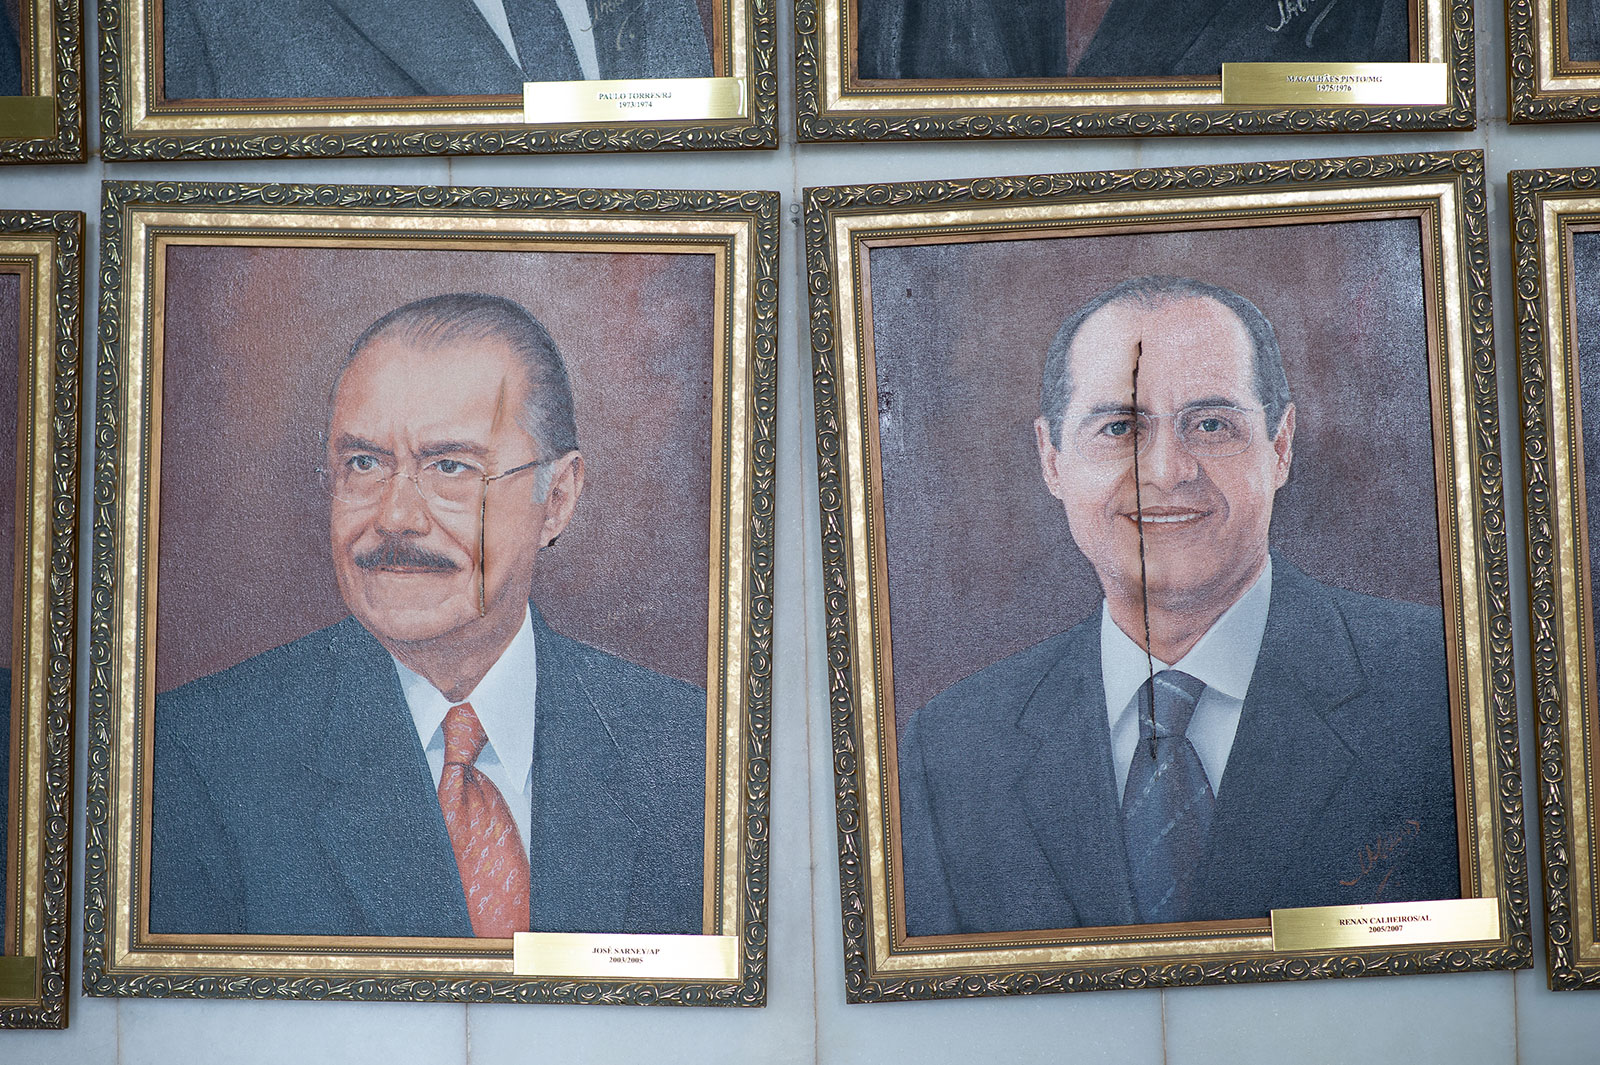 Damaged portraits labeled with the names of Brazilian politicians José Sarney and Renan Calheiros, both former presidents of the Senate, are seen at the Brazilian National Congress following a riot the previous day.